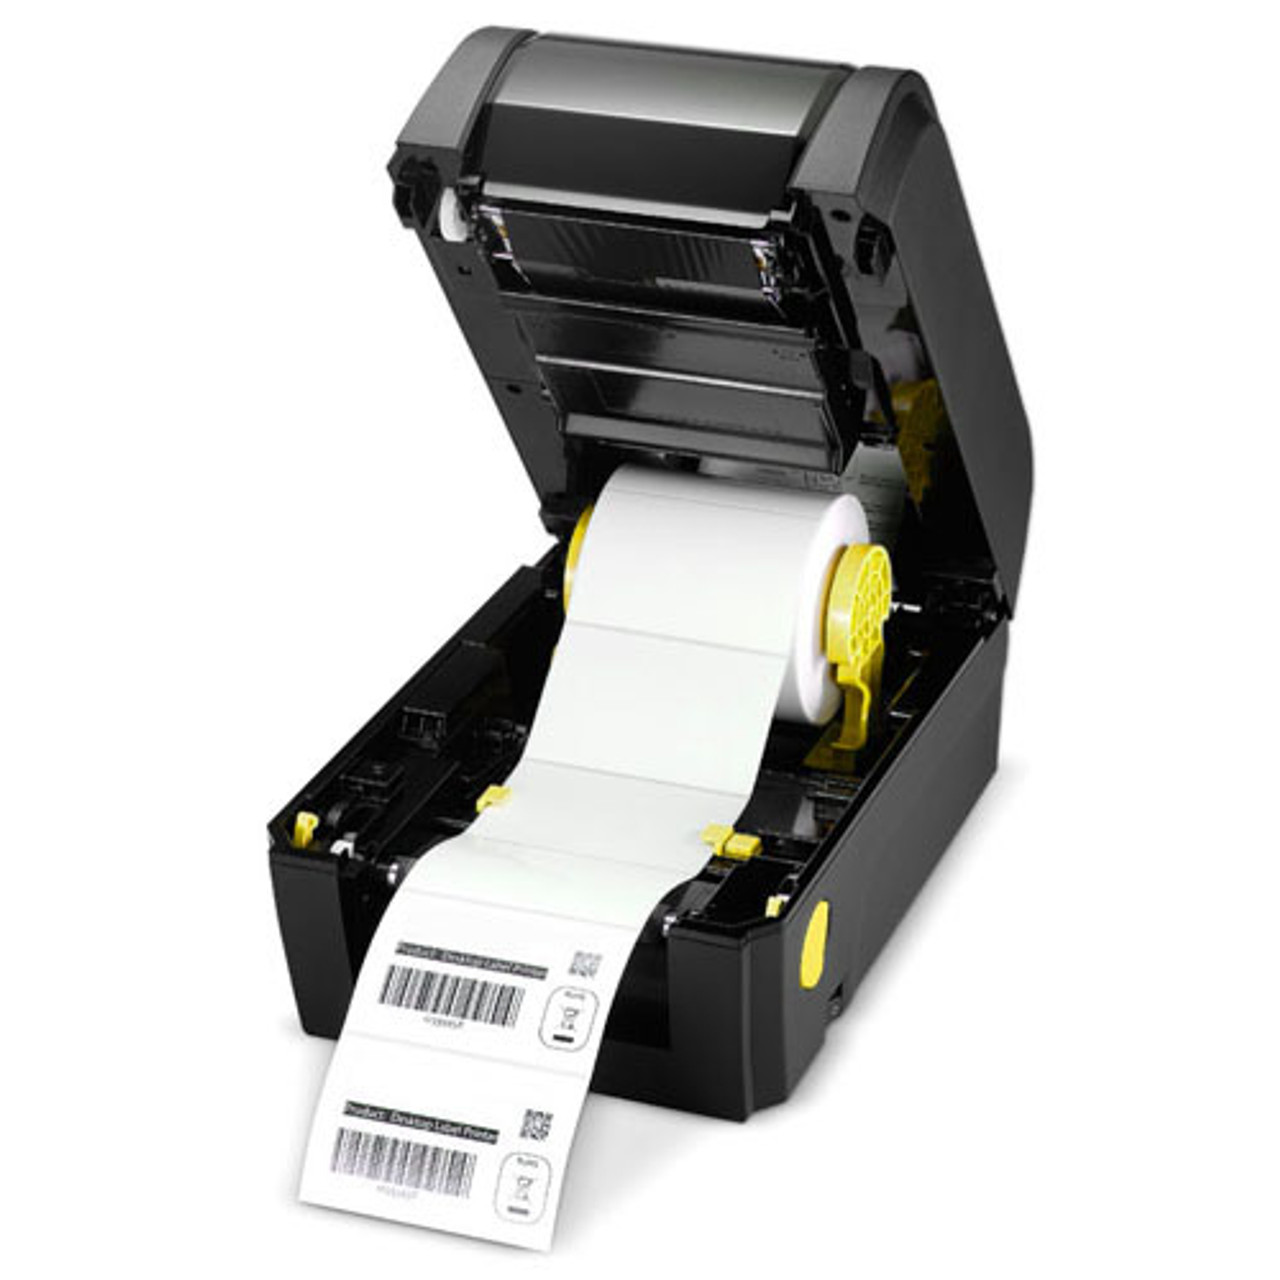 ZEBRA ZD421 Direct Thermal Desktop Printer 203 dpi Print Width 4-inch Features Wired USB and 802.11ac Connectivity ZD4A042-D01W01EZ, No Thermal Ribbon - 2